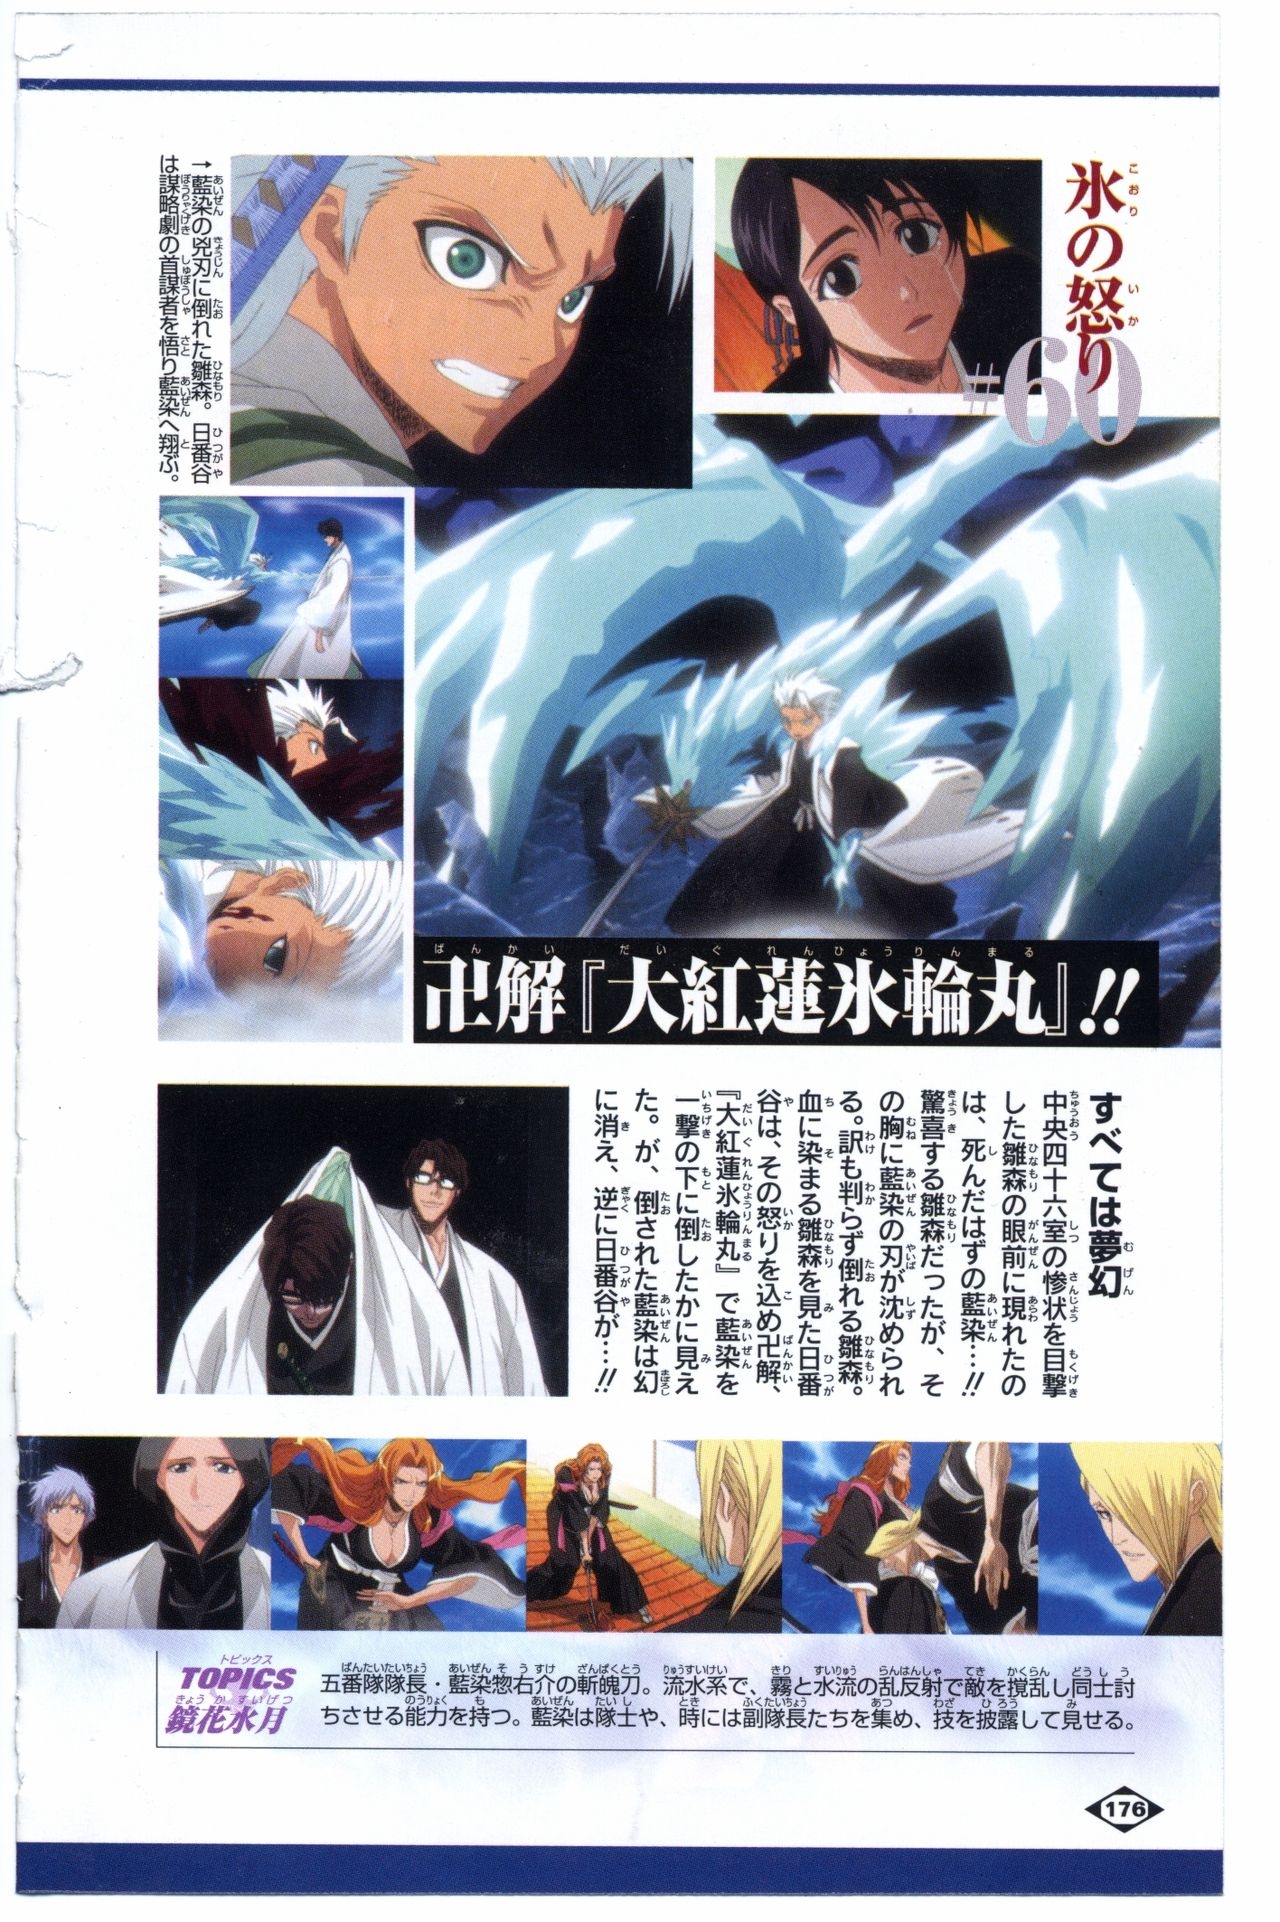 Bleach: Official Animation Book VIBEs 176